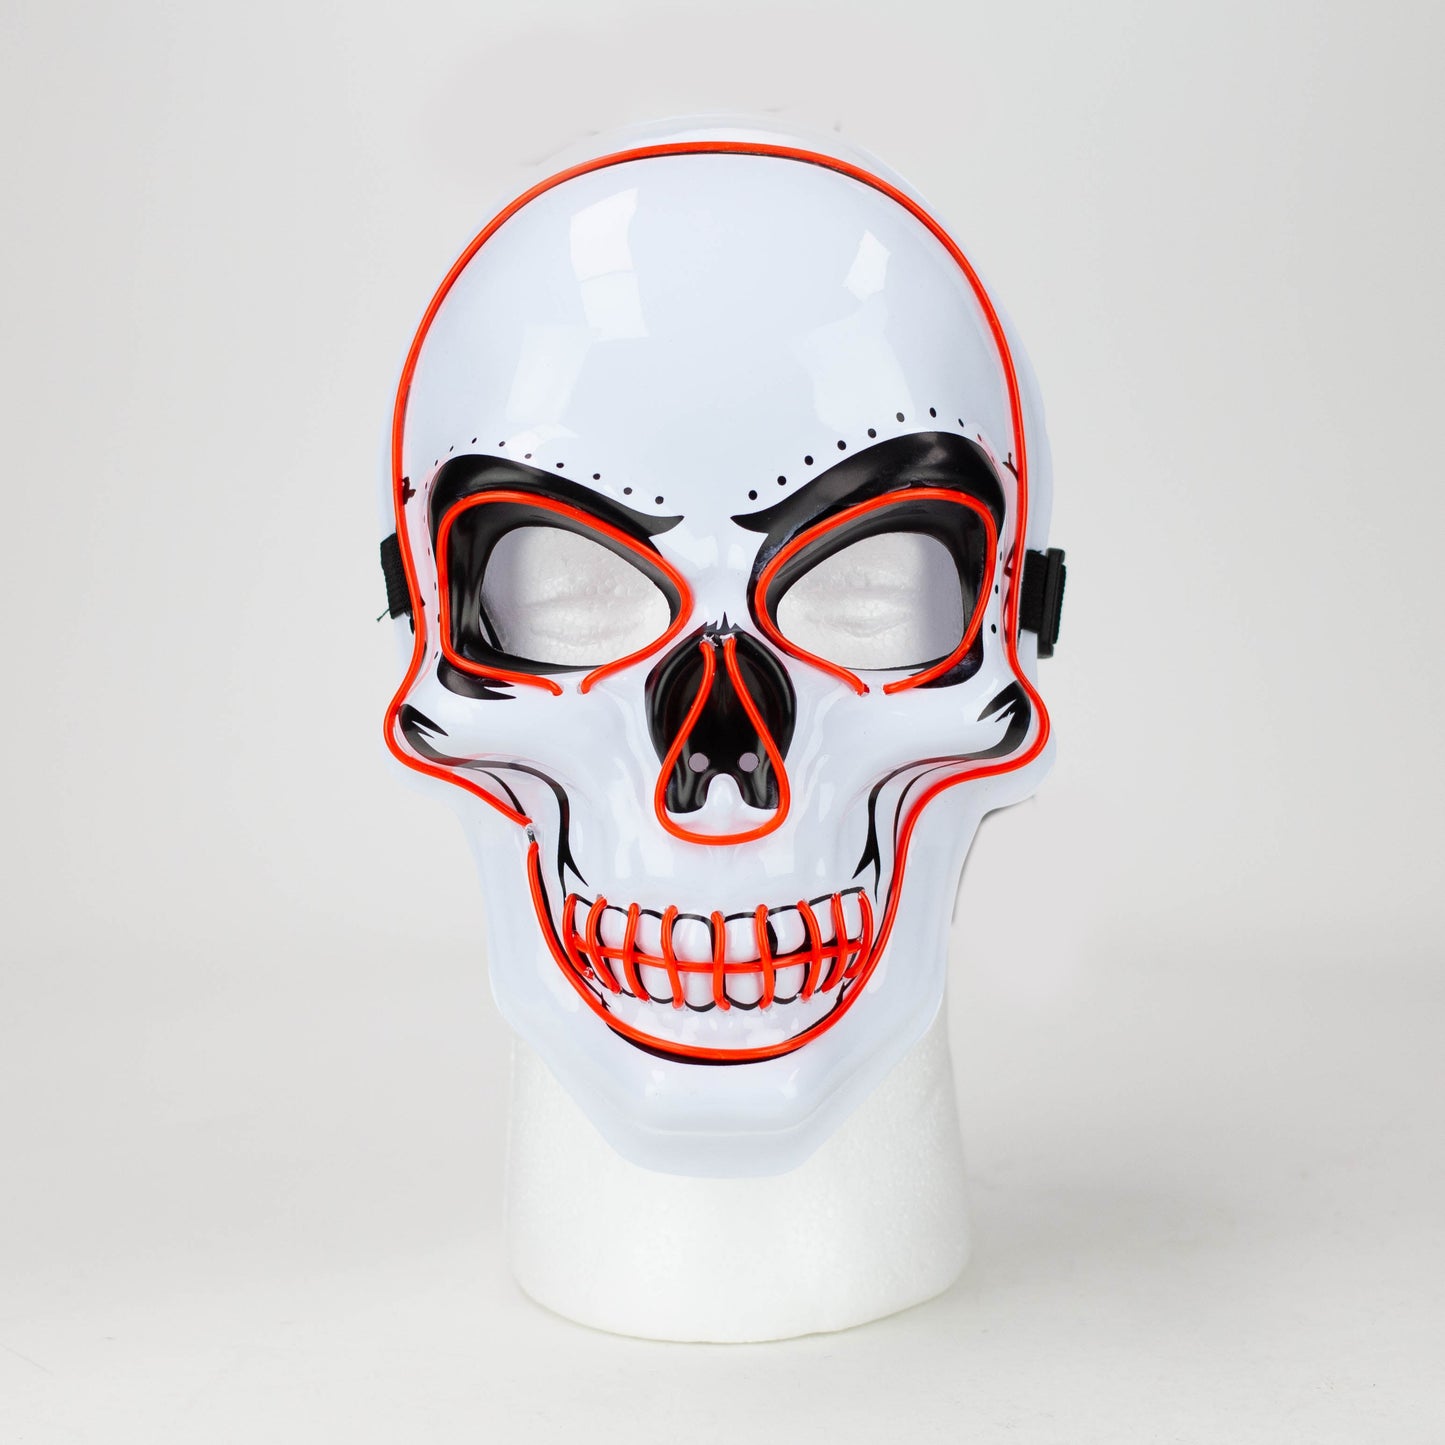 LED Neon Skull Mask for party or Halloween Costume_5